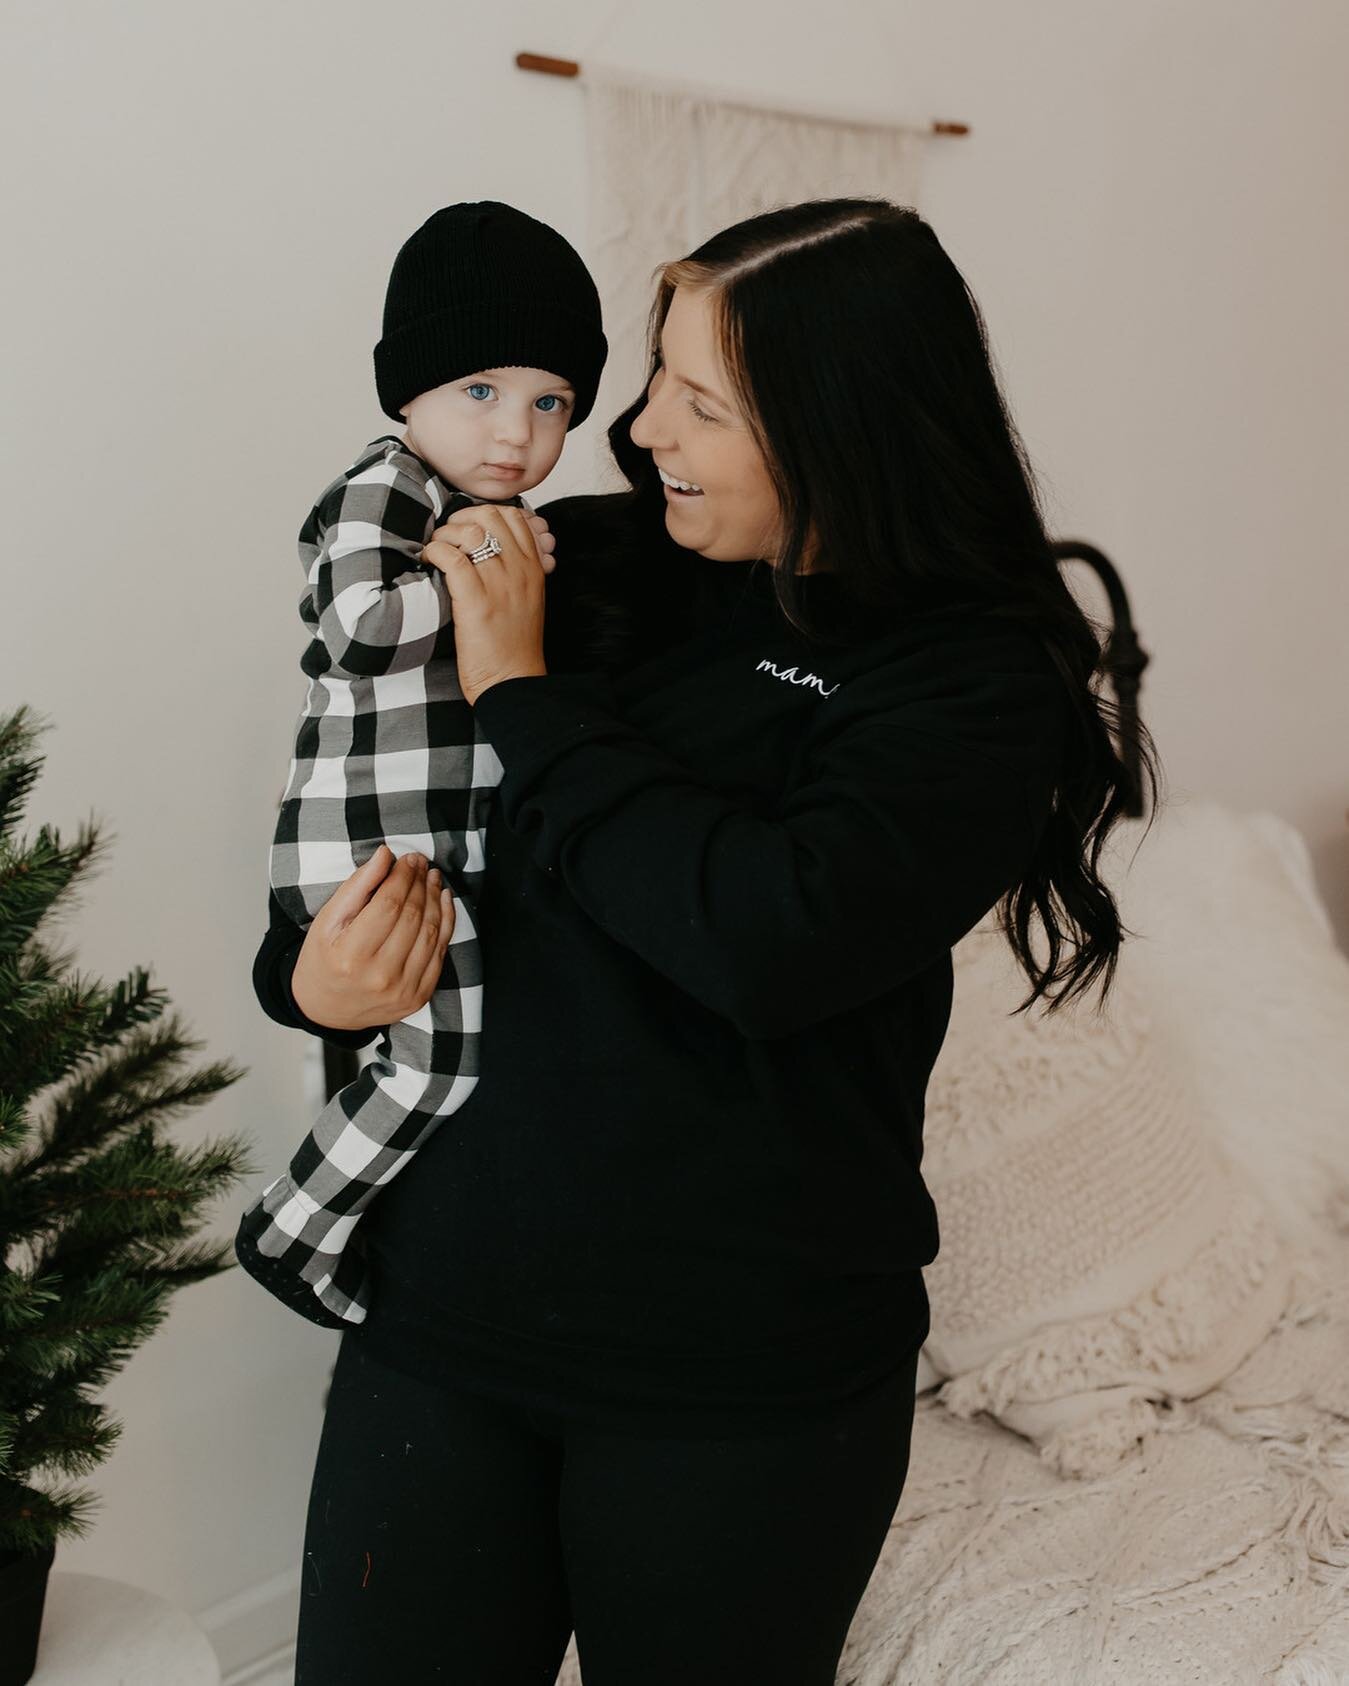 Match your littles in the coziest sweatshirt embroidered with mama on the front. Swipe to see how gorgeous this new modern, timeless font is! We are obsessed! (but there are only a few left so get them while you can!) 
⠀⠀⠀⠀⠀⠀⠀⠀⠀
Today is the last day